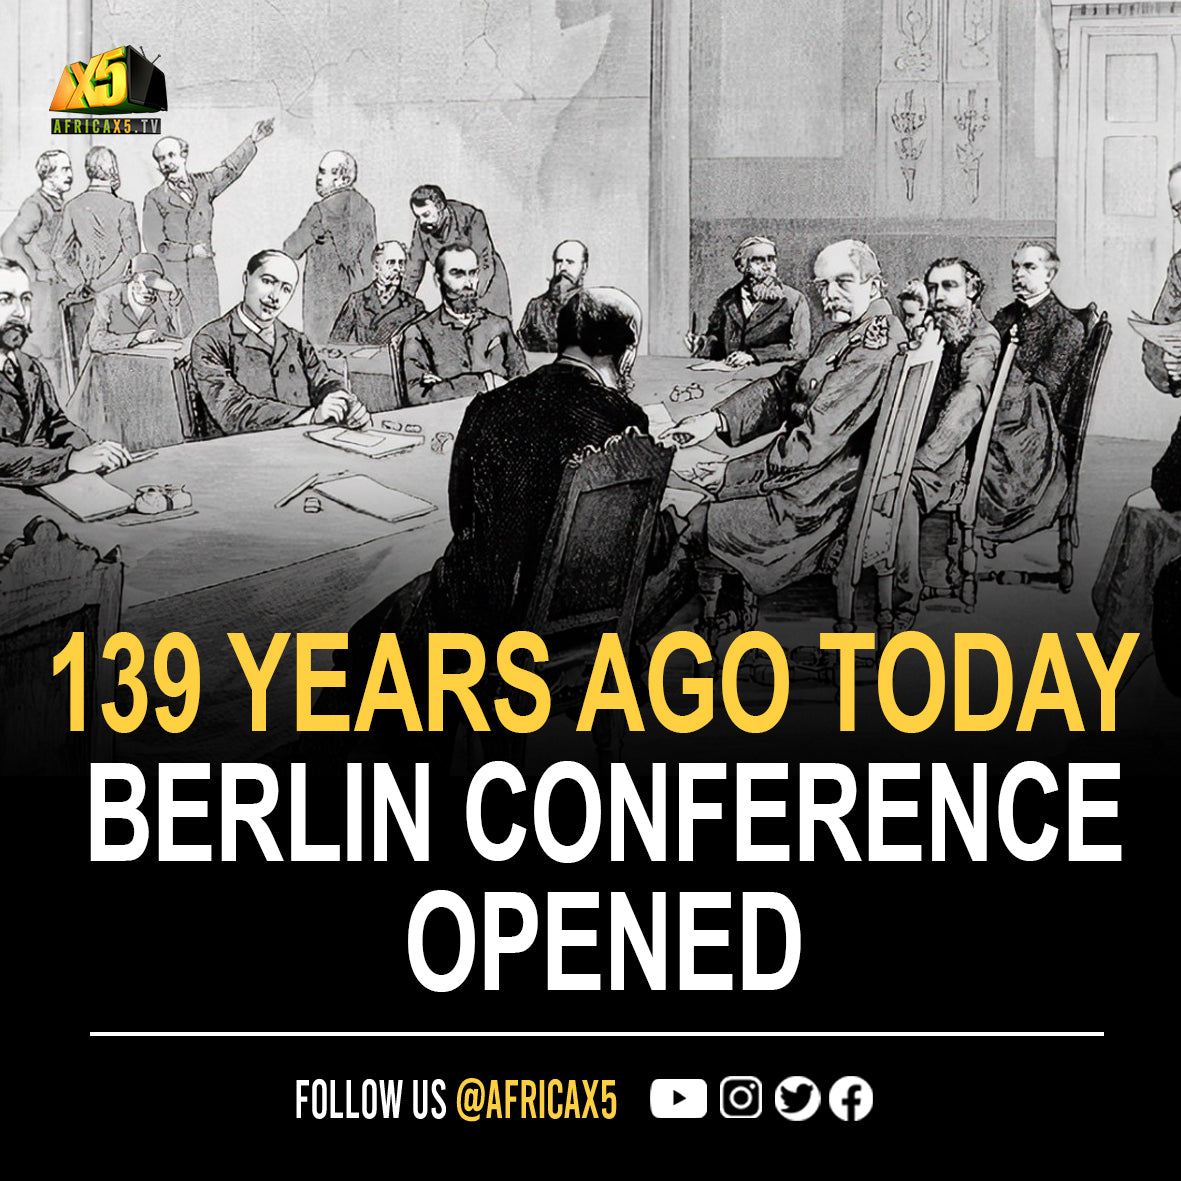 139 years ago today, the Berlin Conference opened.